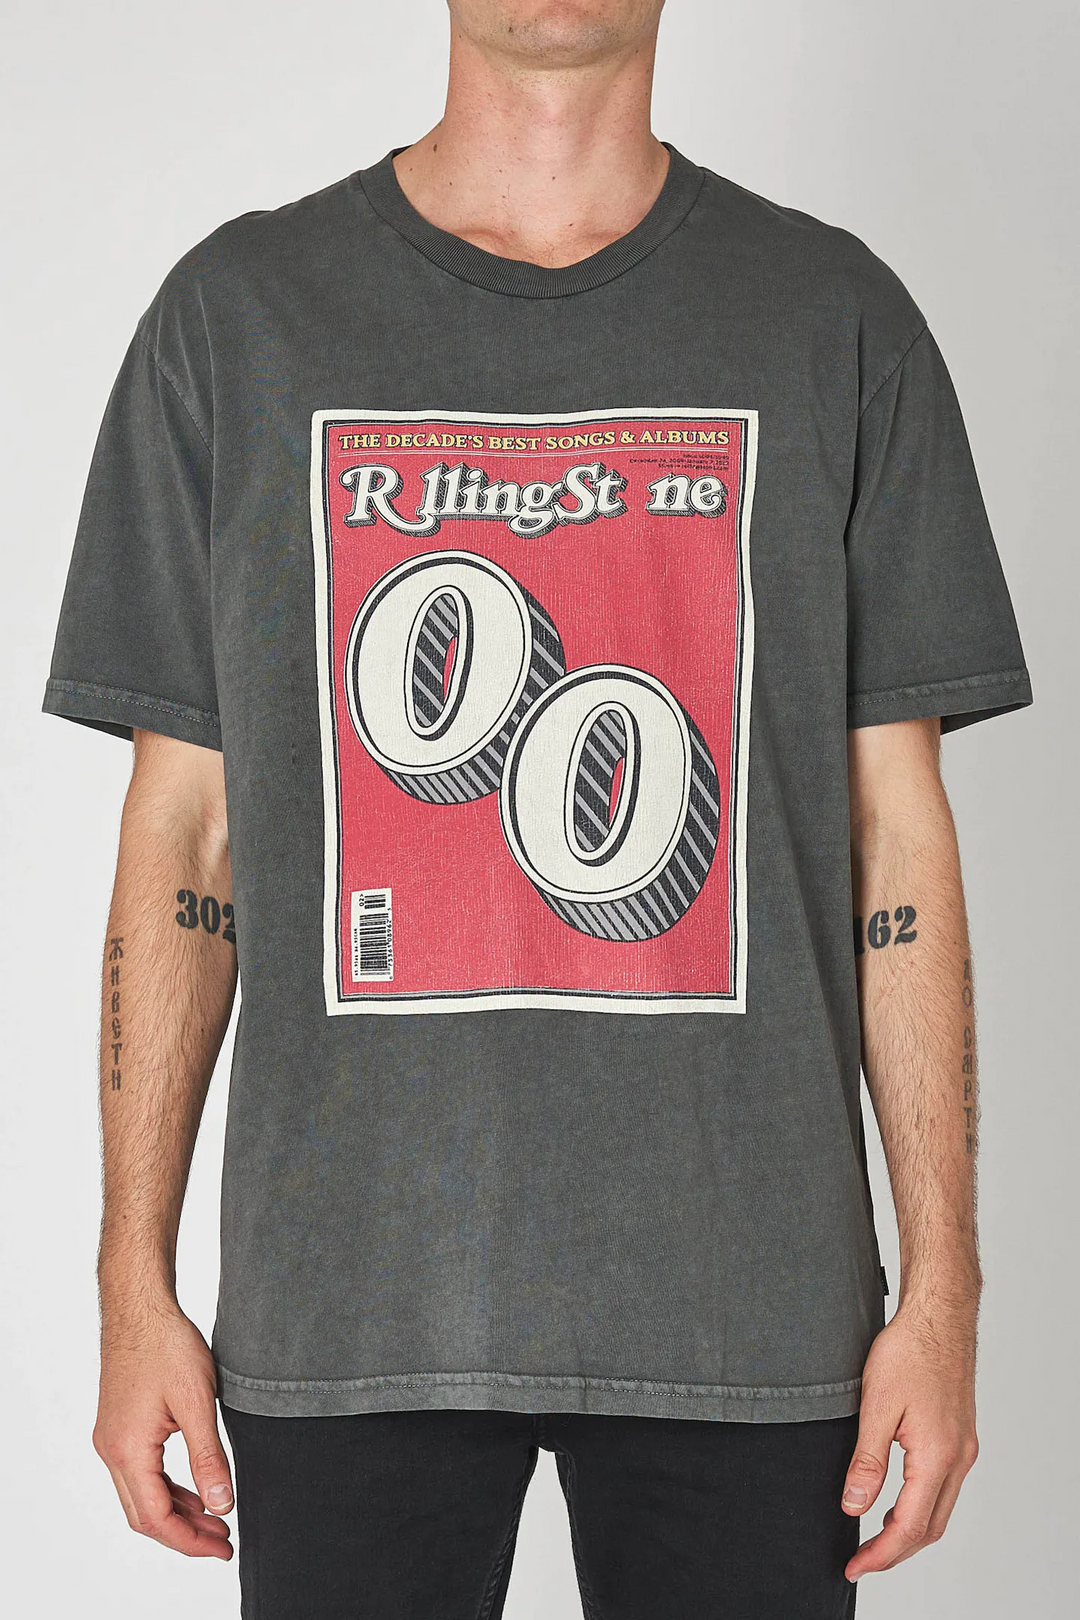 Rolla's - Rolling Stone Double Drop Tee - Washed Black